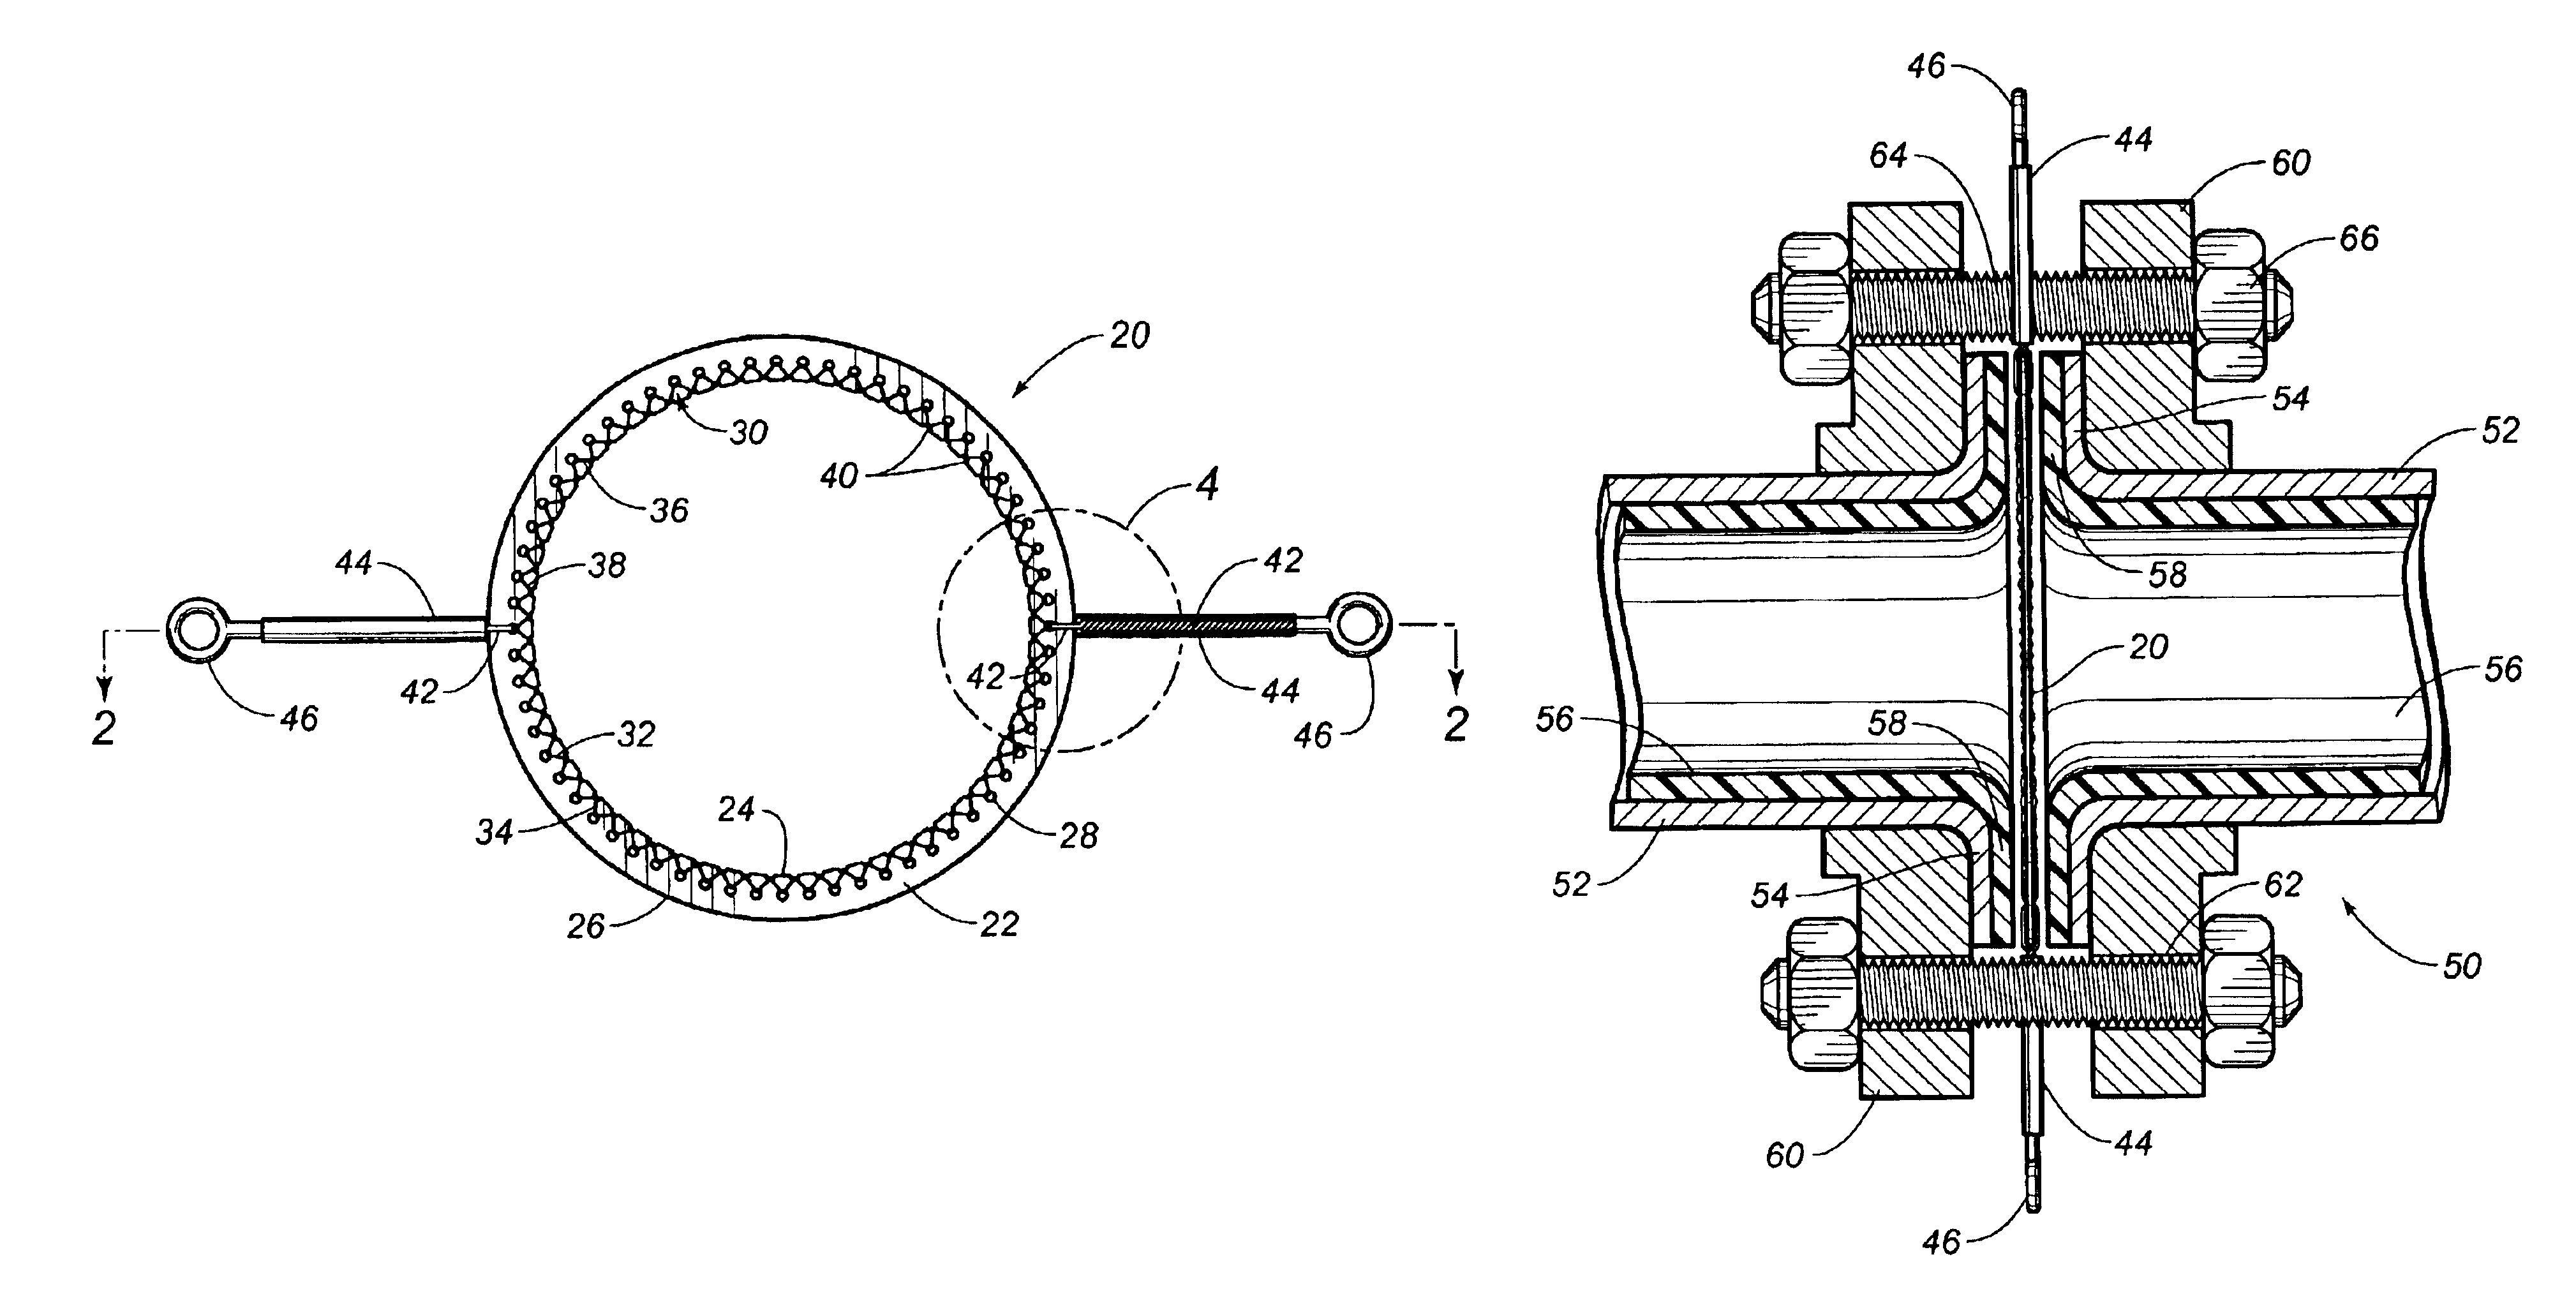 Welded flange connection